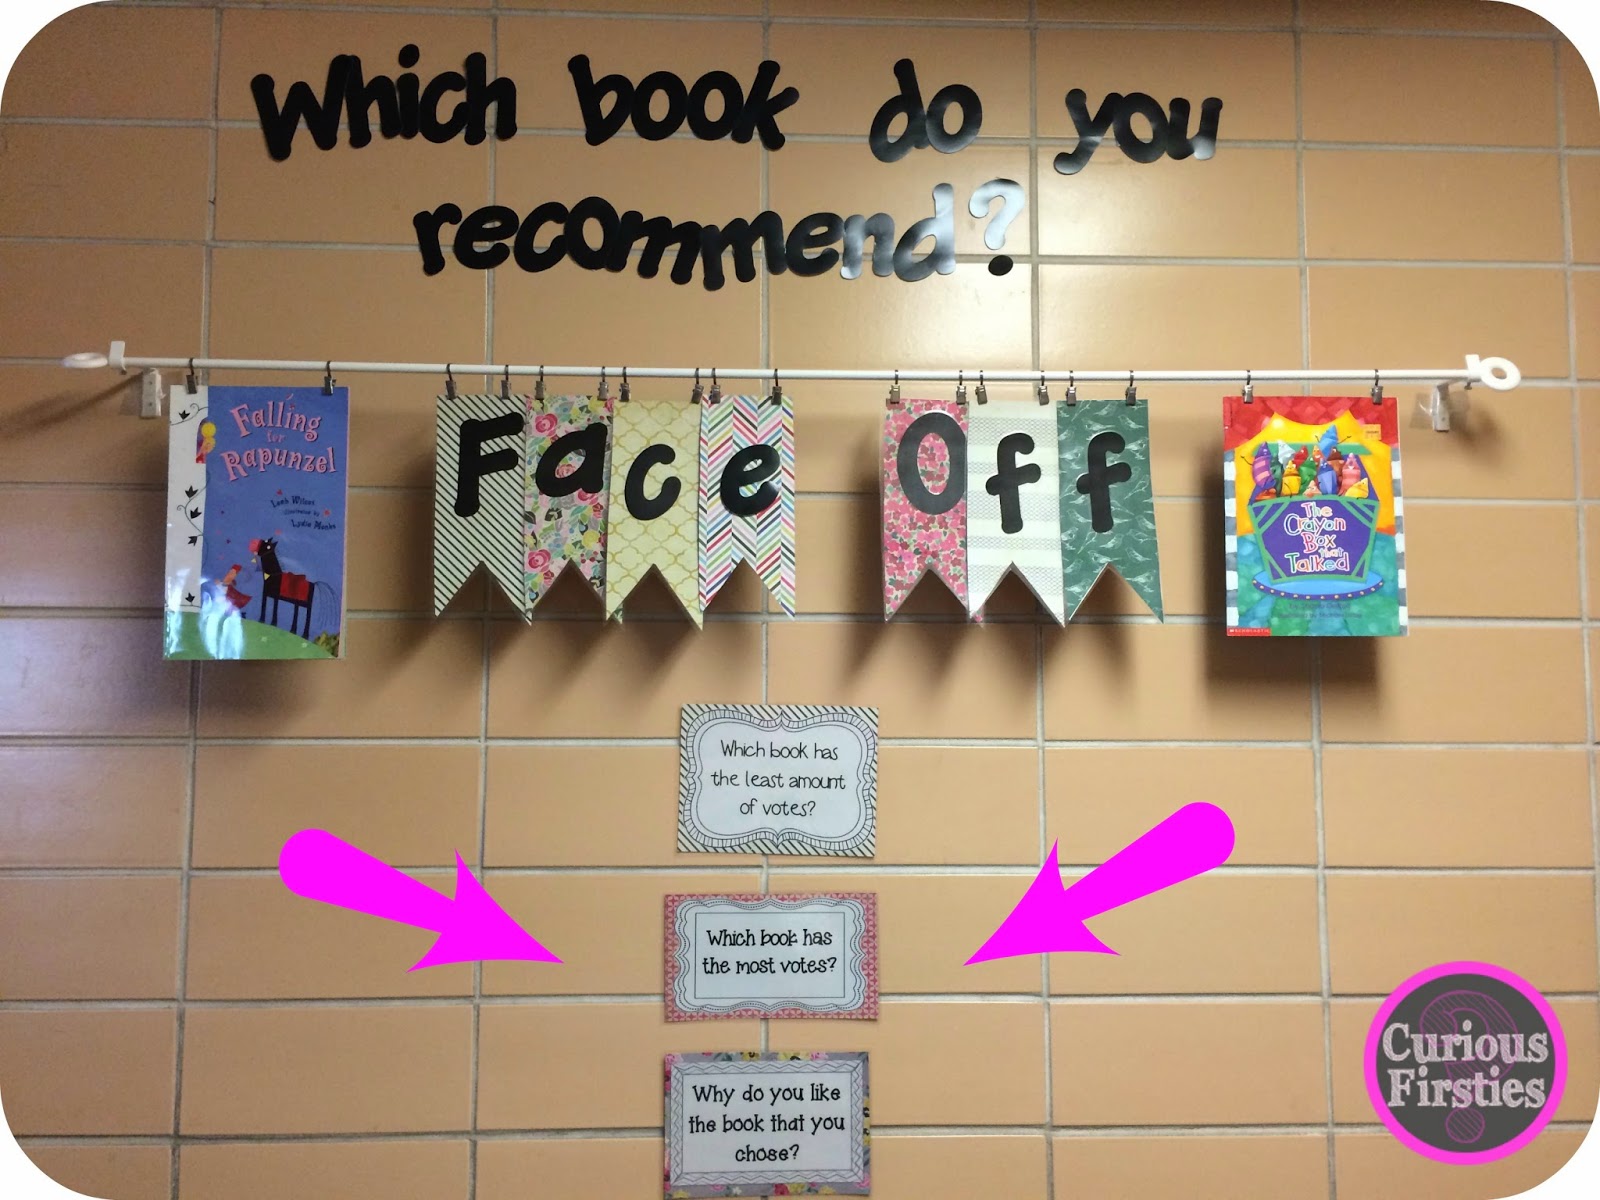 engage students by asking them to recommend books to others